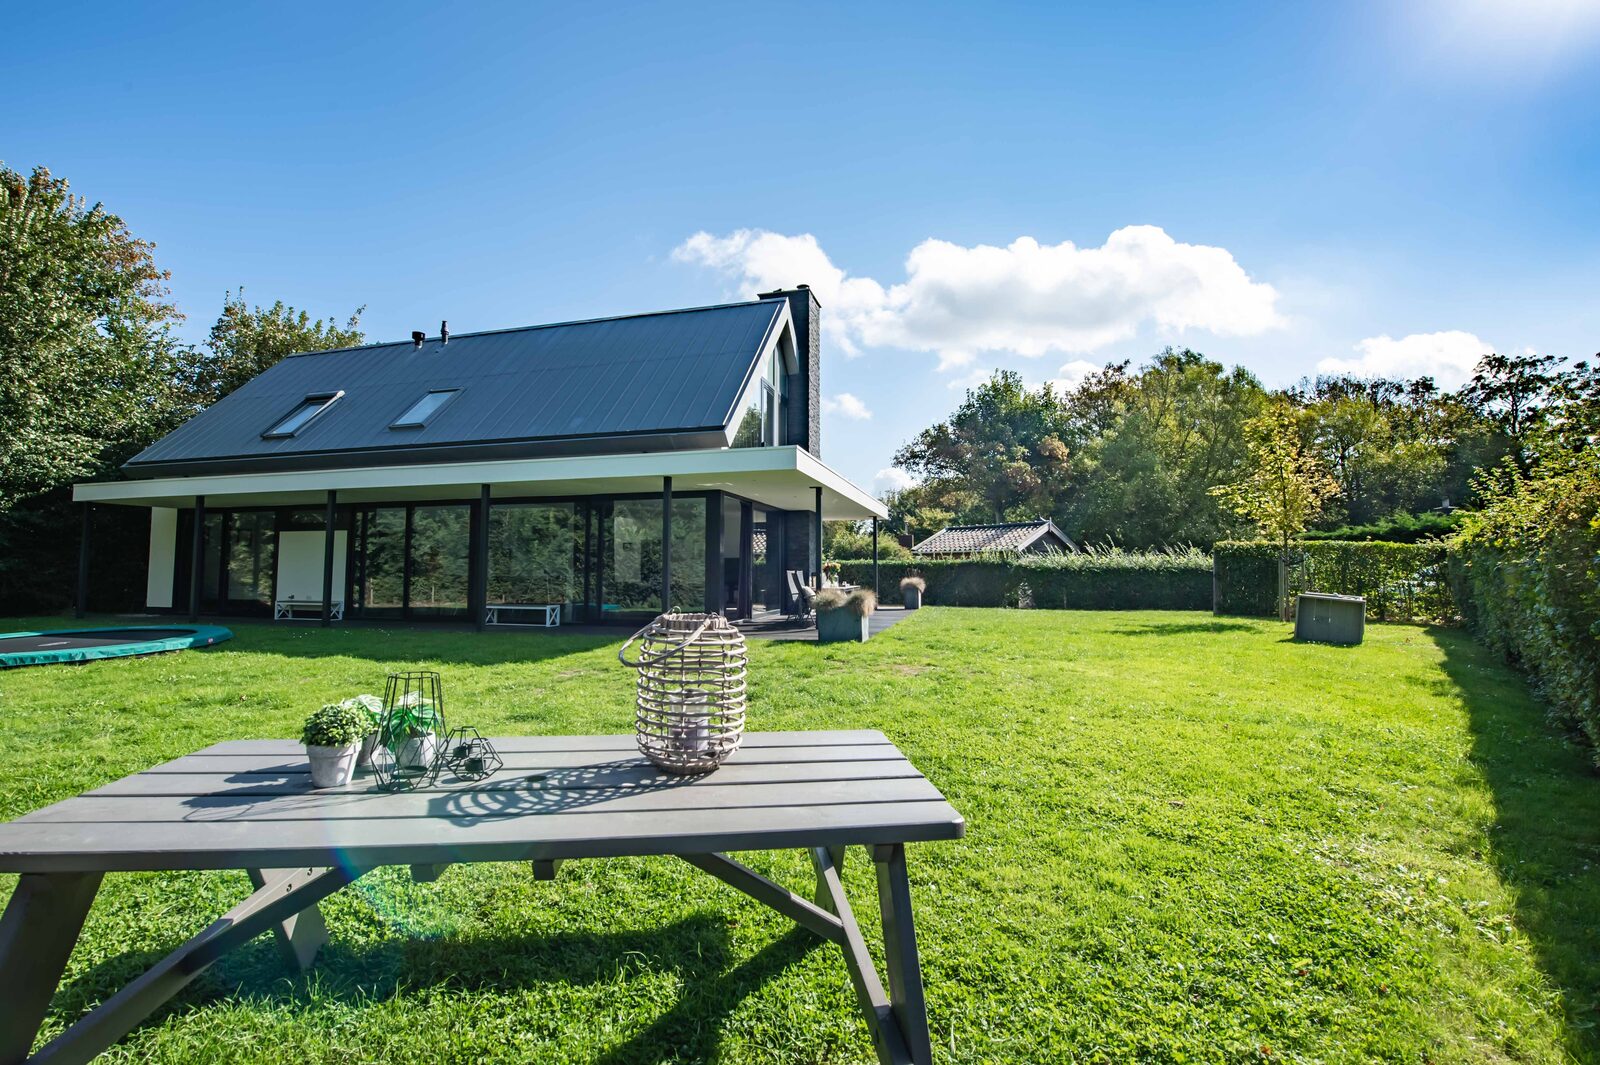 Private holiday homes in zeeland